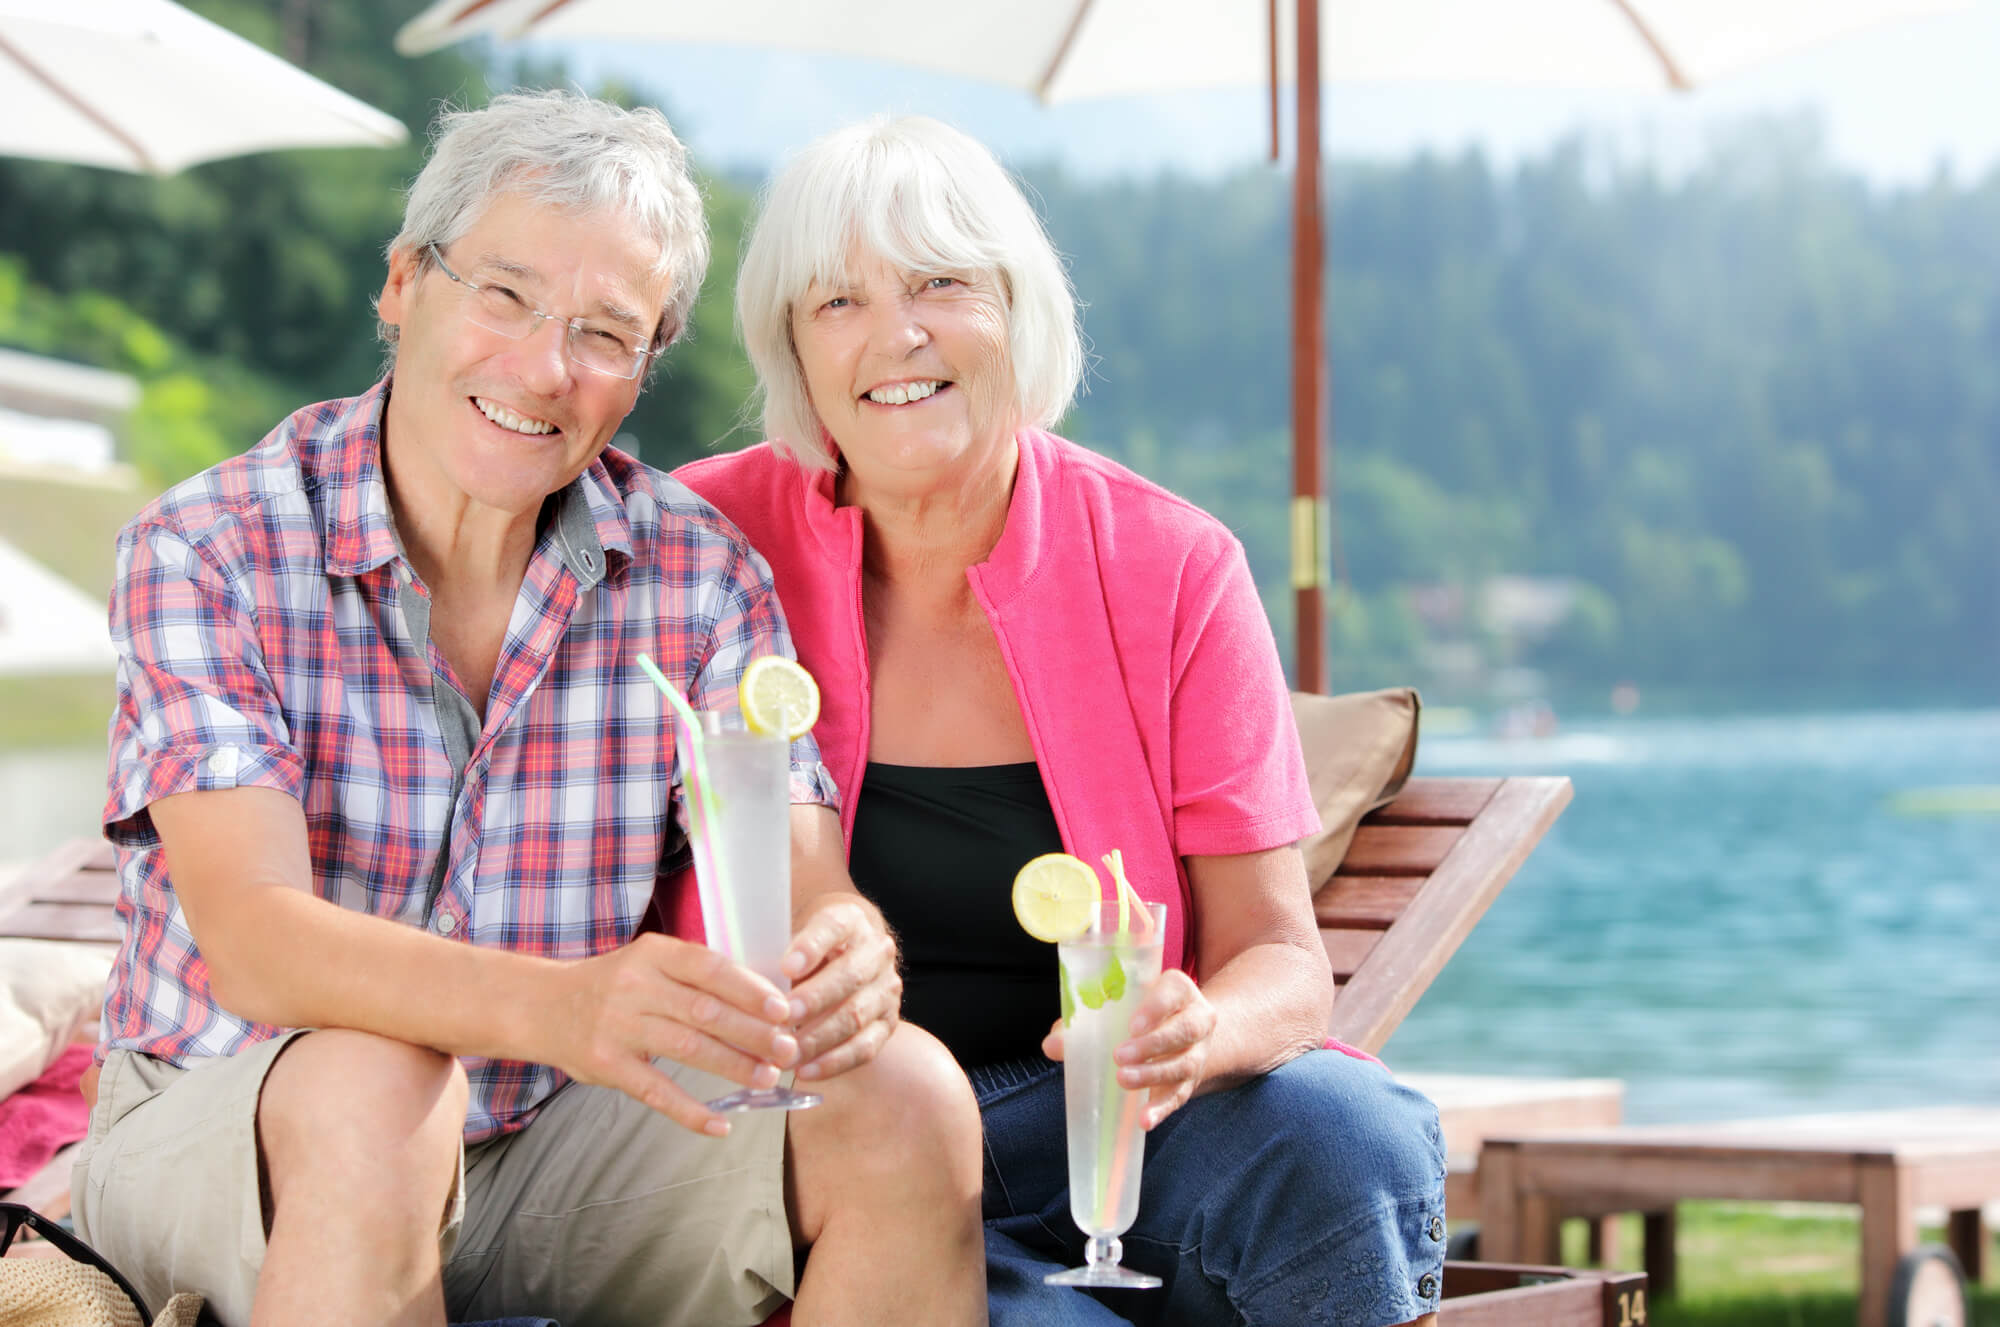 Embracing the Summer: Outdoor Activities and Social Engagement for Seniors in the Summer